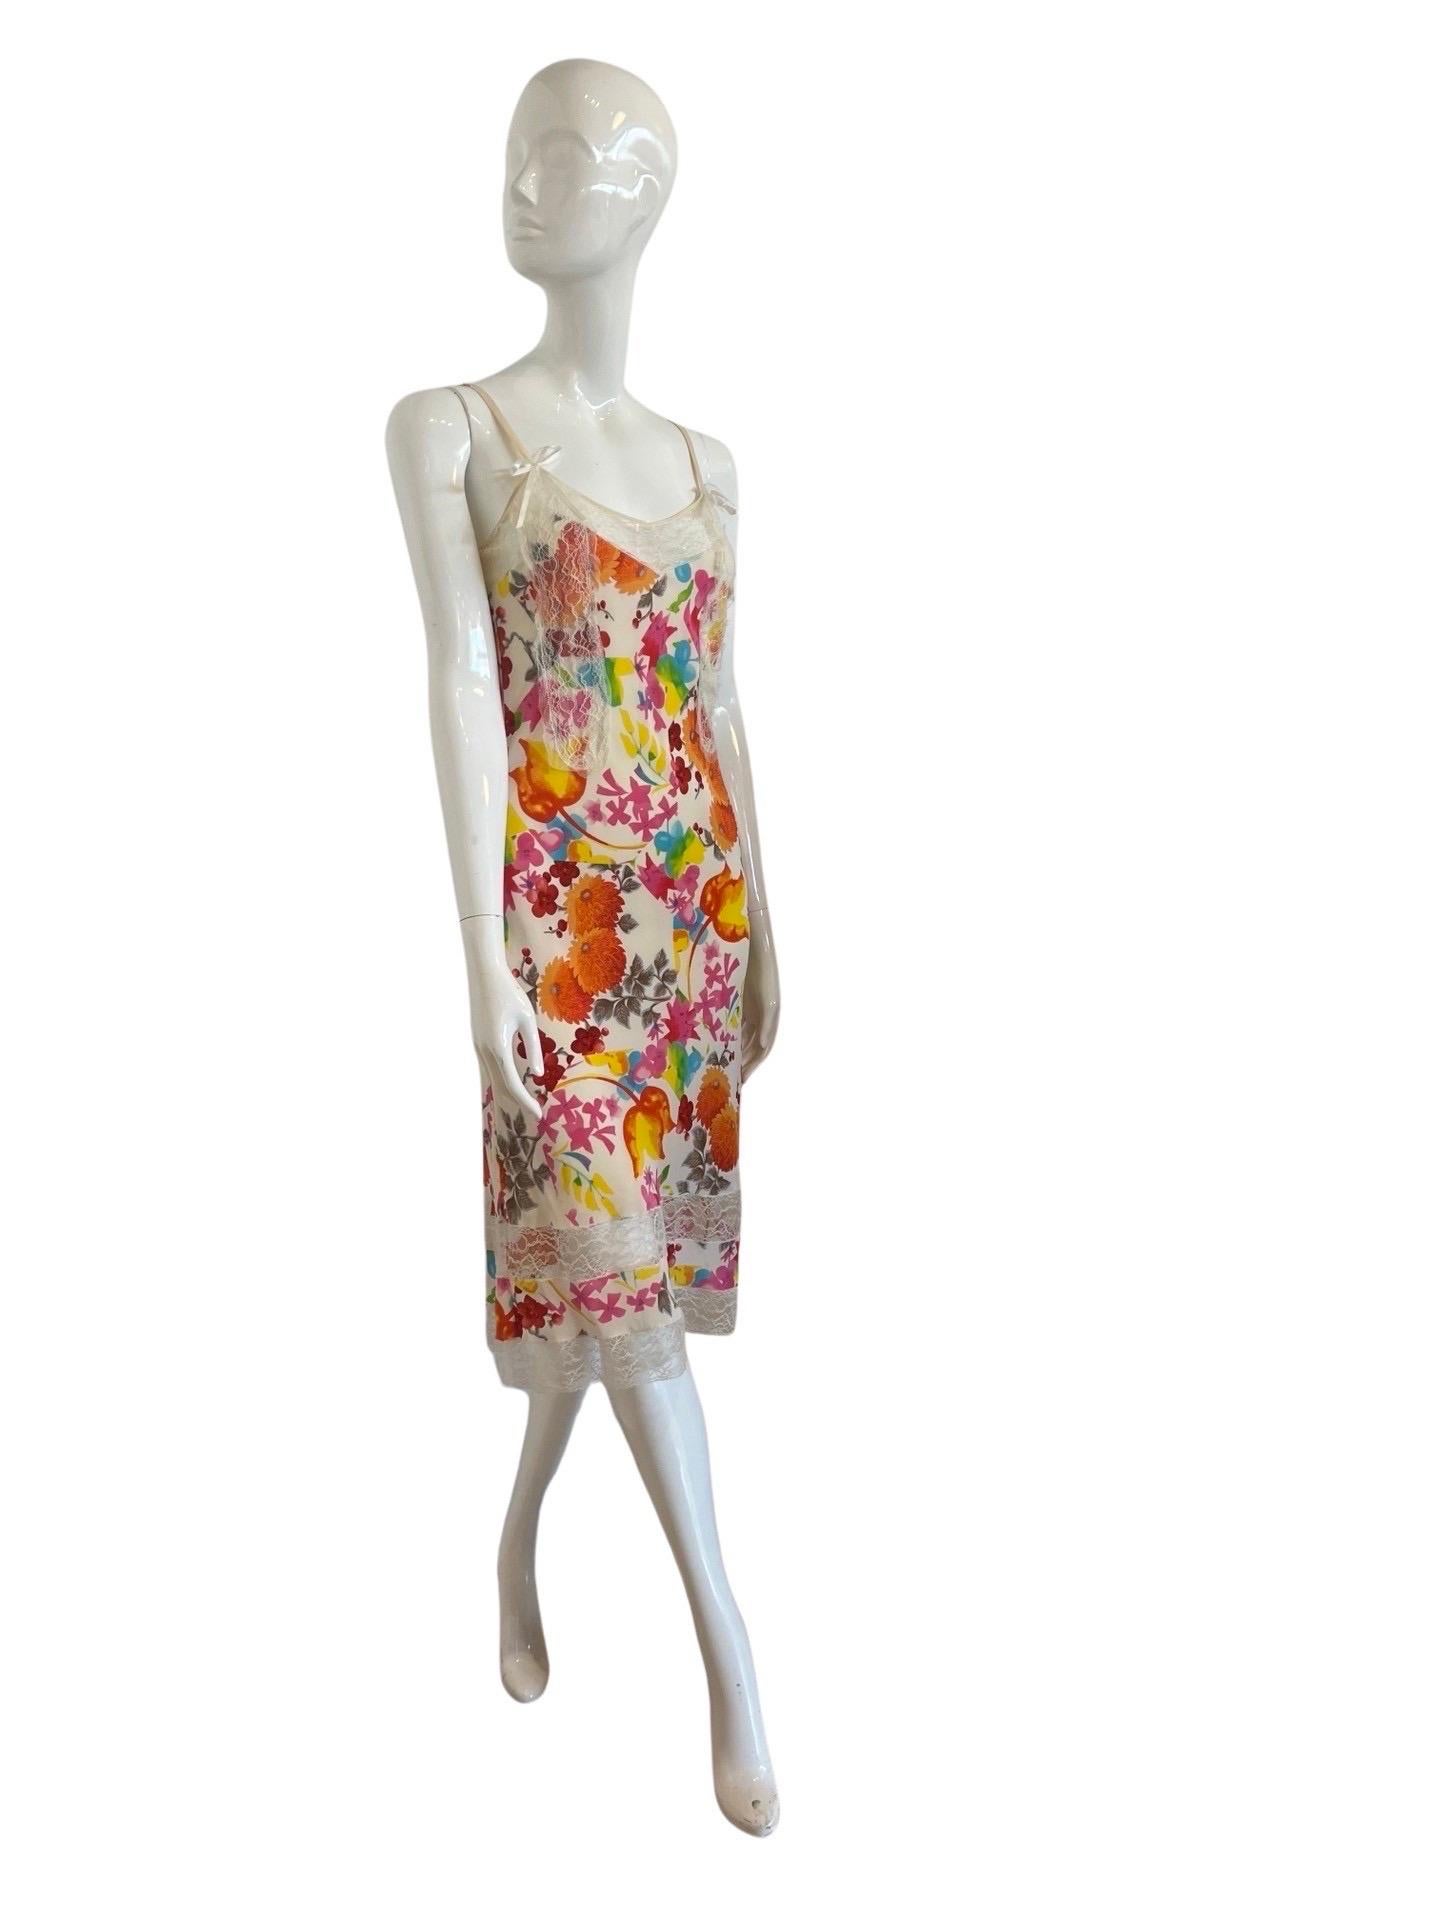 2000s Christian Dior by John Galliano Floral Dress In Excellent Condition For Sale In Miami, FL